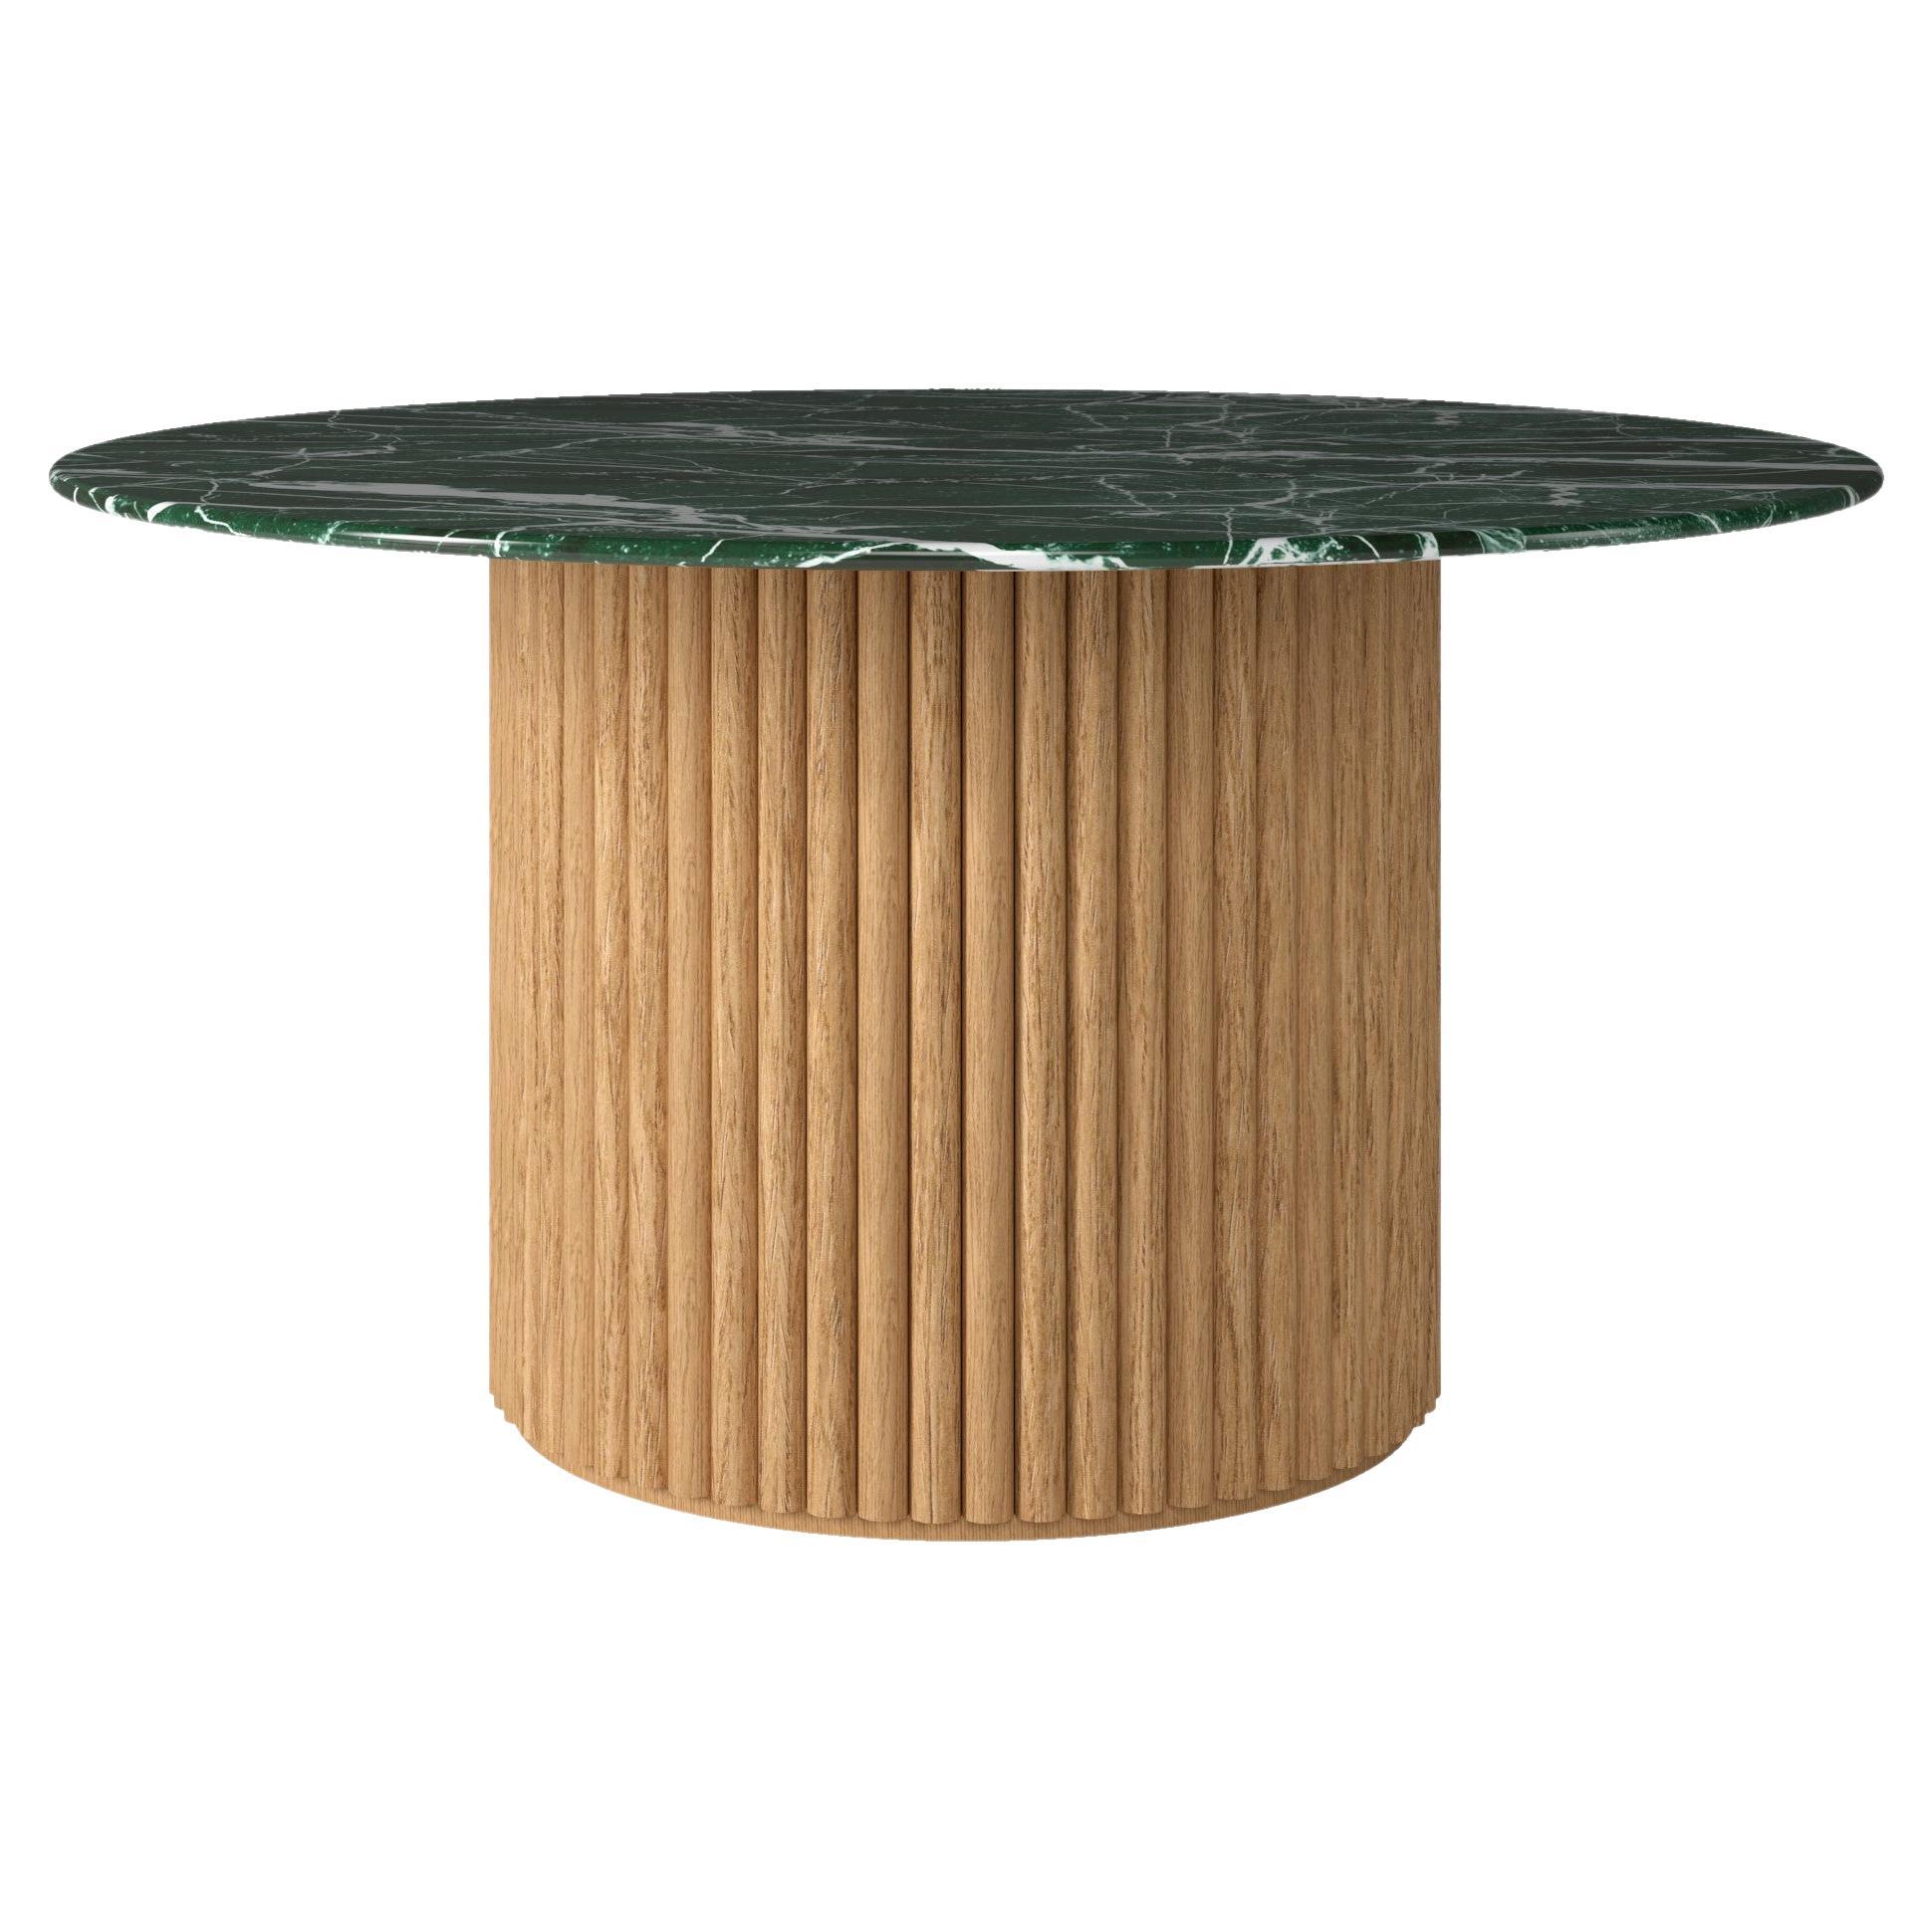 NORDST Mette Round Dining Table, Italian Green Marble, Danish Modern Design, New For Sale